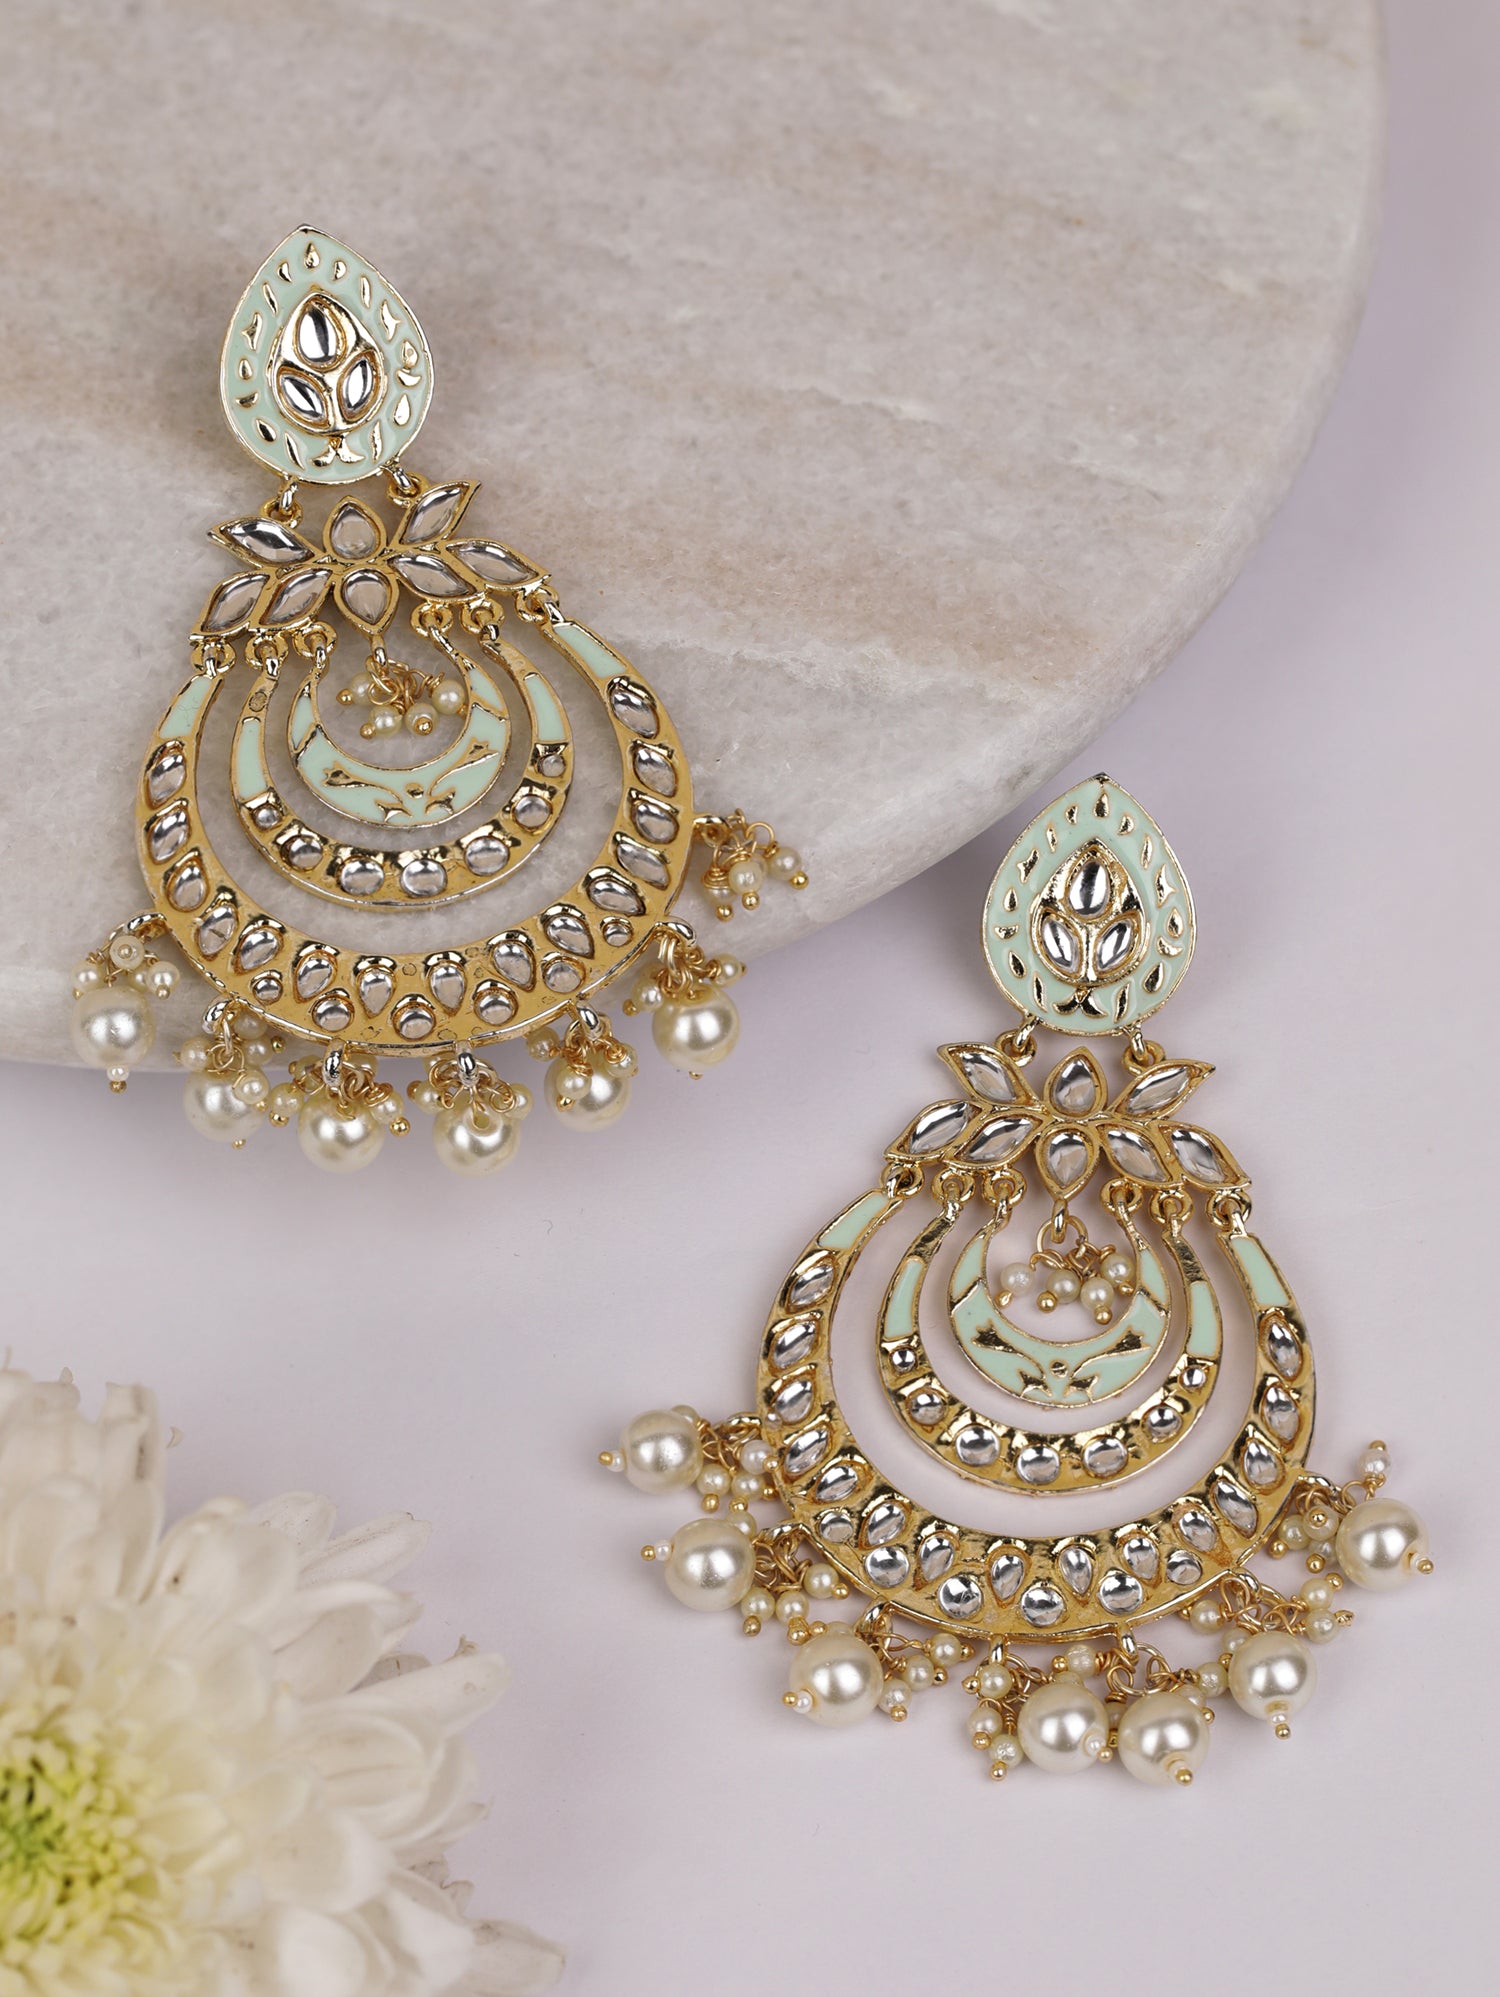 500 INR Big Sized Samar Chandbali Earrings Kindly note these r big sized  and heavy to wear | Instagram